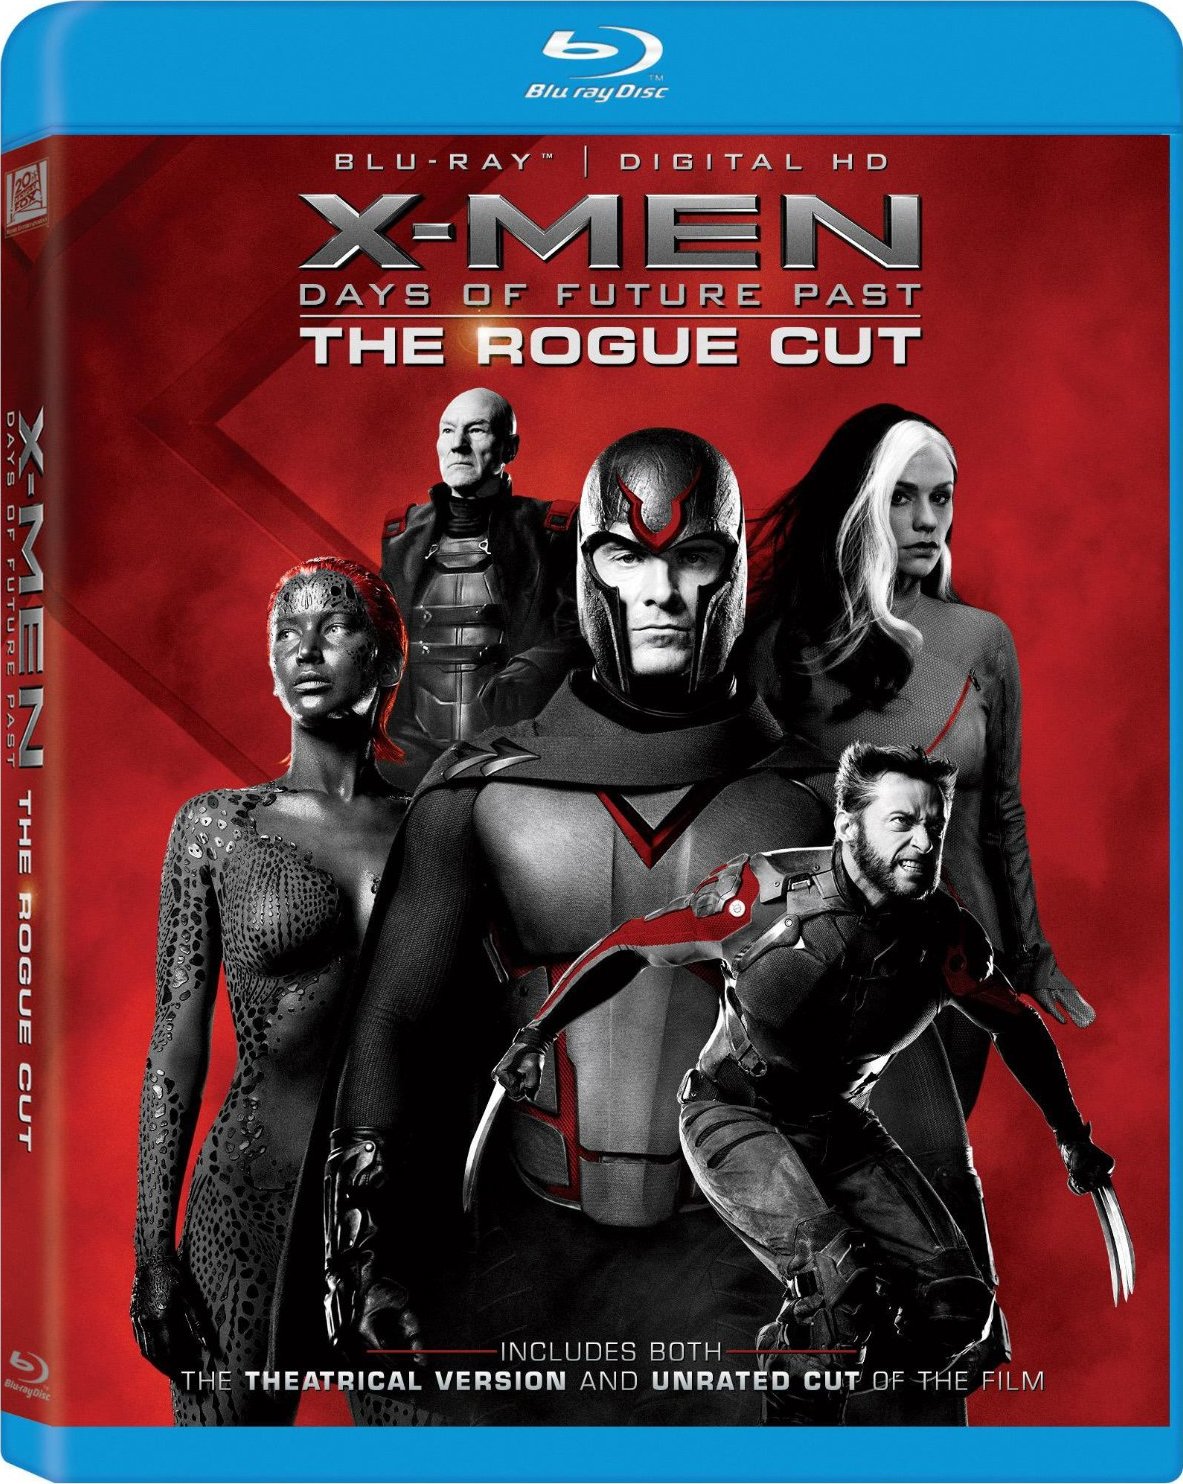 X-Men Days of Future Past: The Rogue Cut Blu-ray Detailed